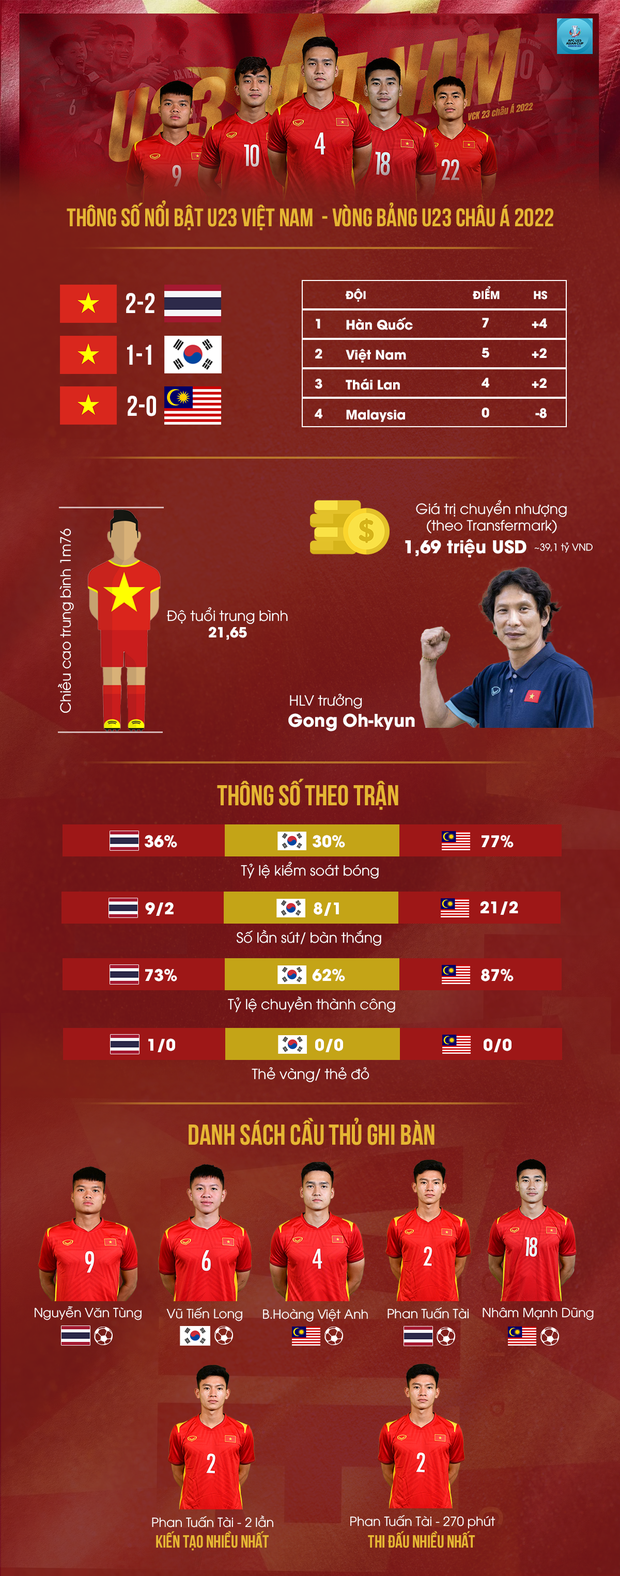 Infographic: Looking back at the memorable numbers of U23 Vietnam in the group stage of U23 Asia 2022 - Photo 1.